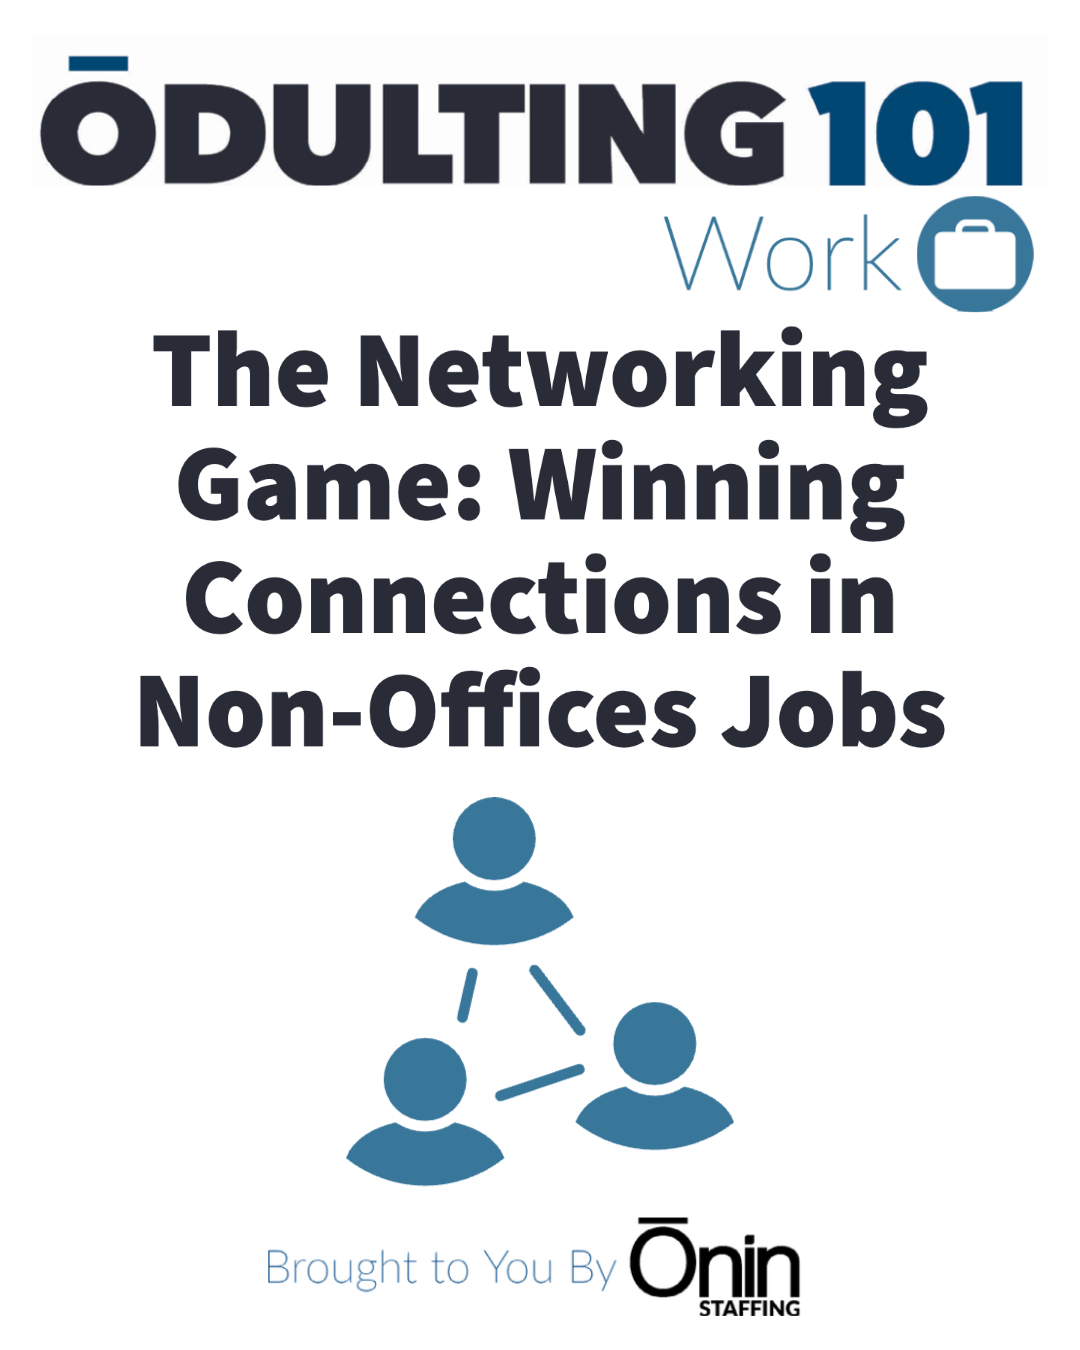 Line art illustration of three heads in a triangle representing networking connections, with black text stating "The Networking Game: Winning Connections in Non-Office Jobs" for the Odulting series about Work.